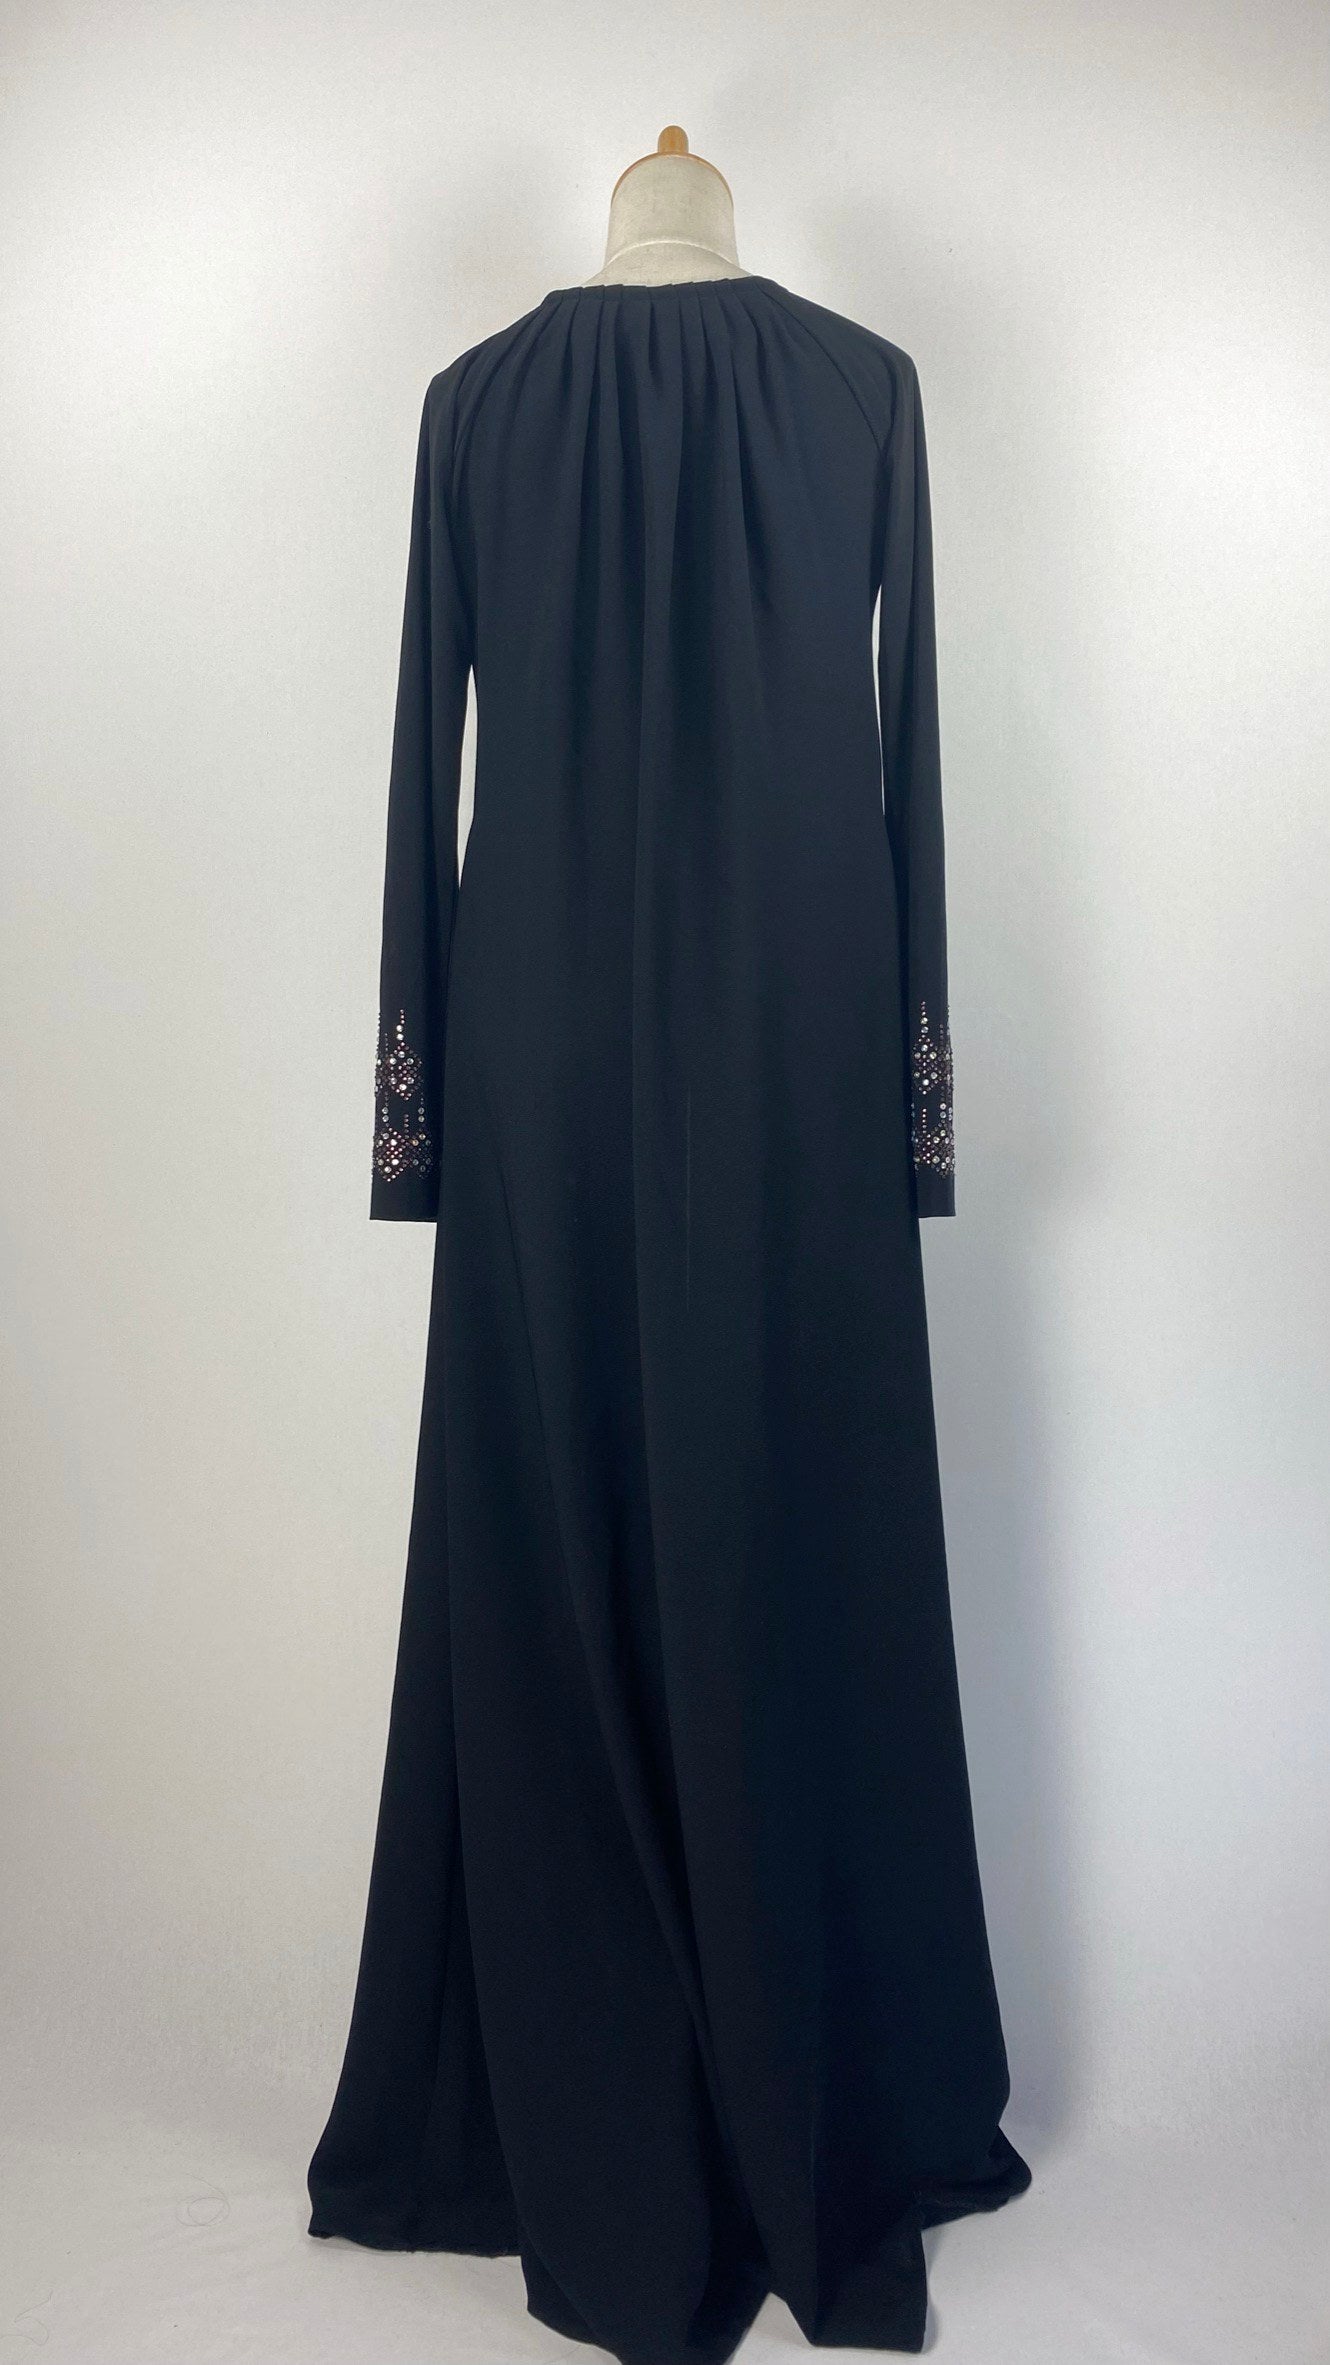 Long Sleeve Closed A-Line Abaya with Beading, Black and Pink